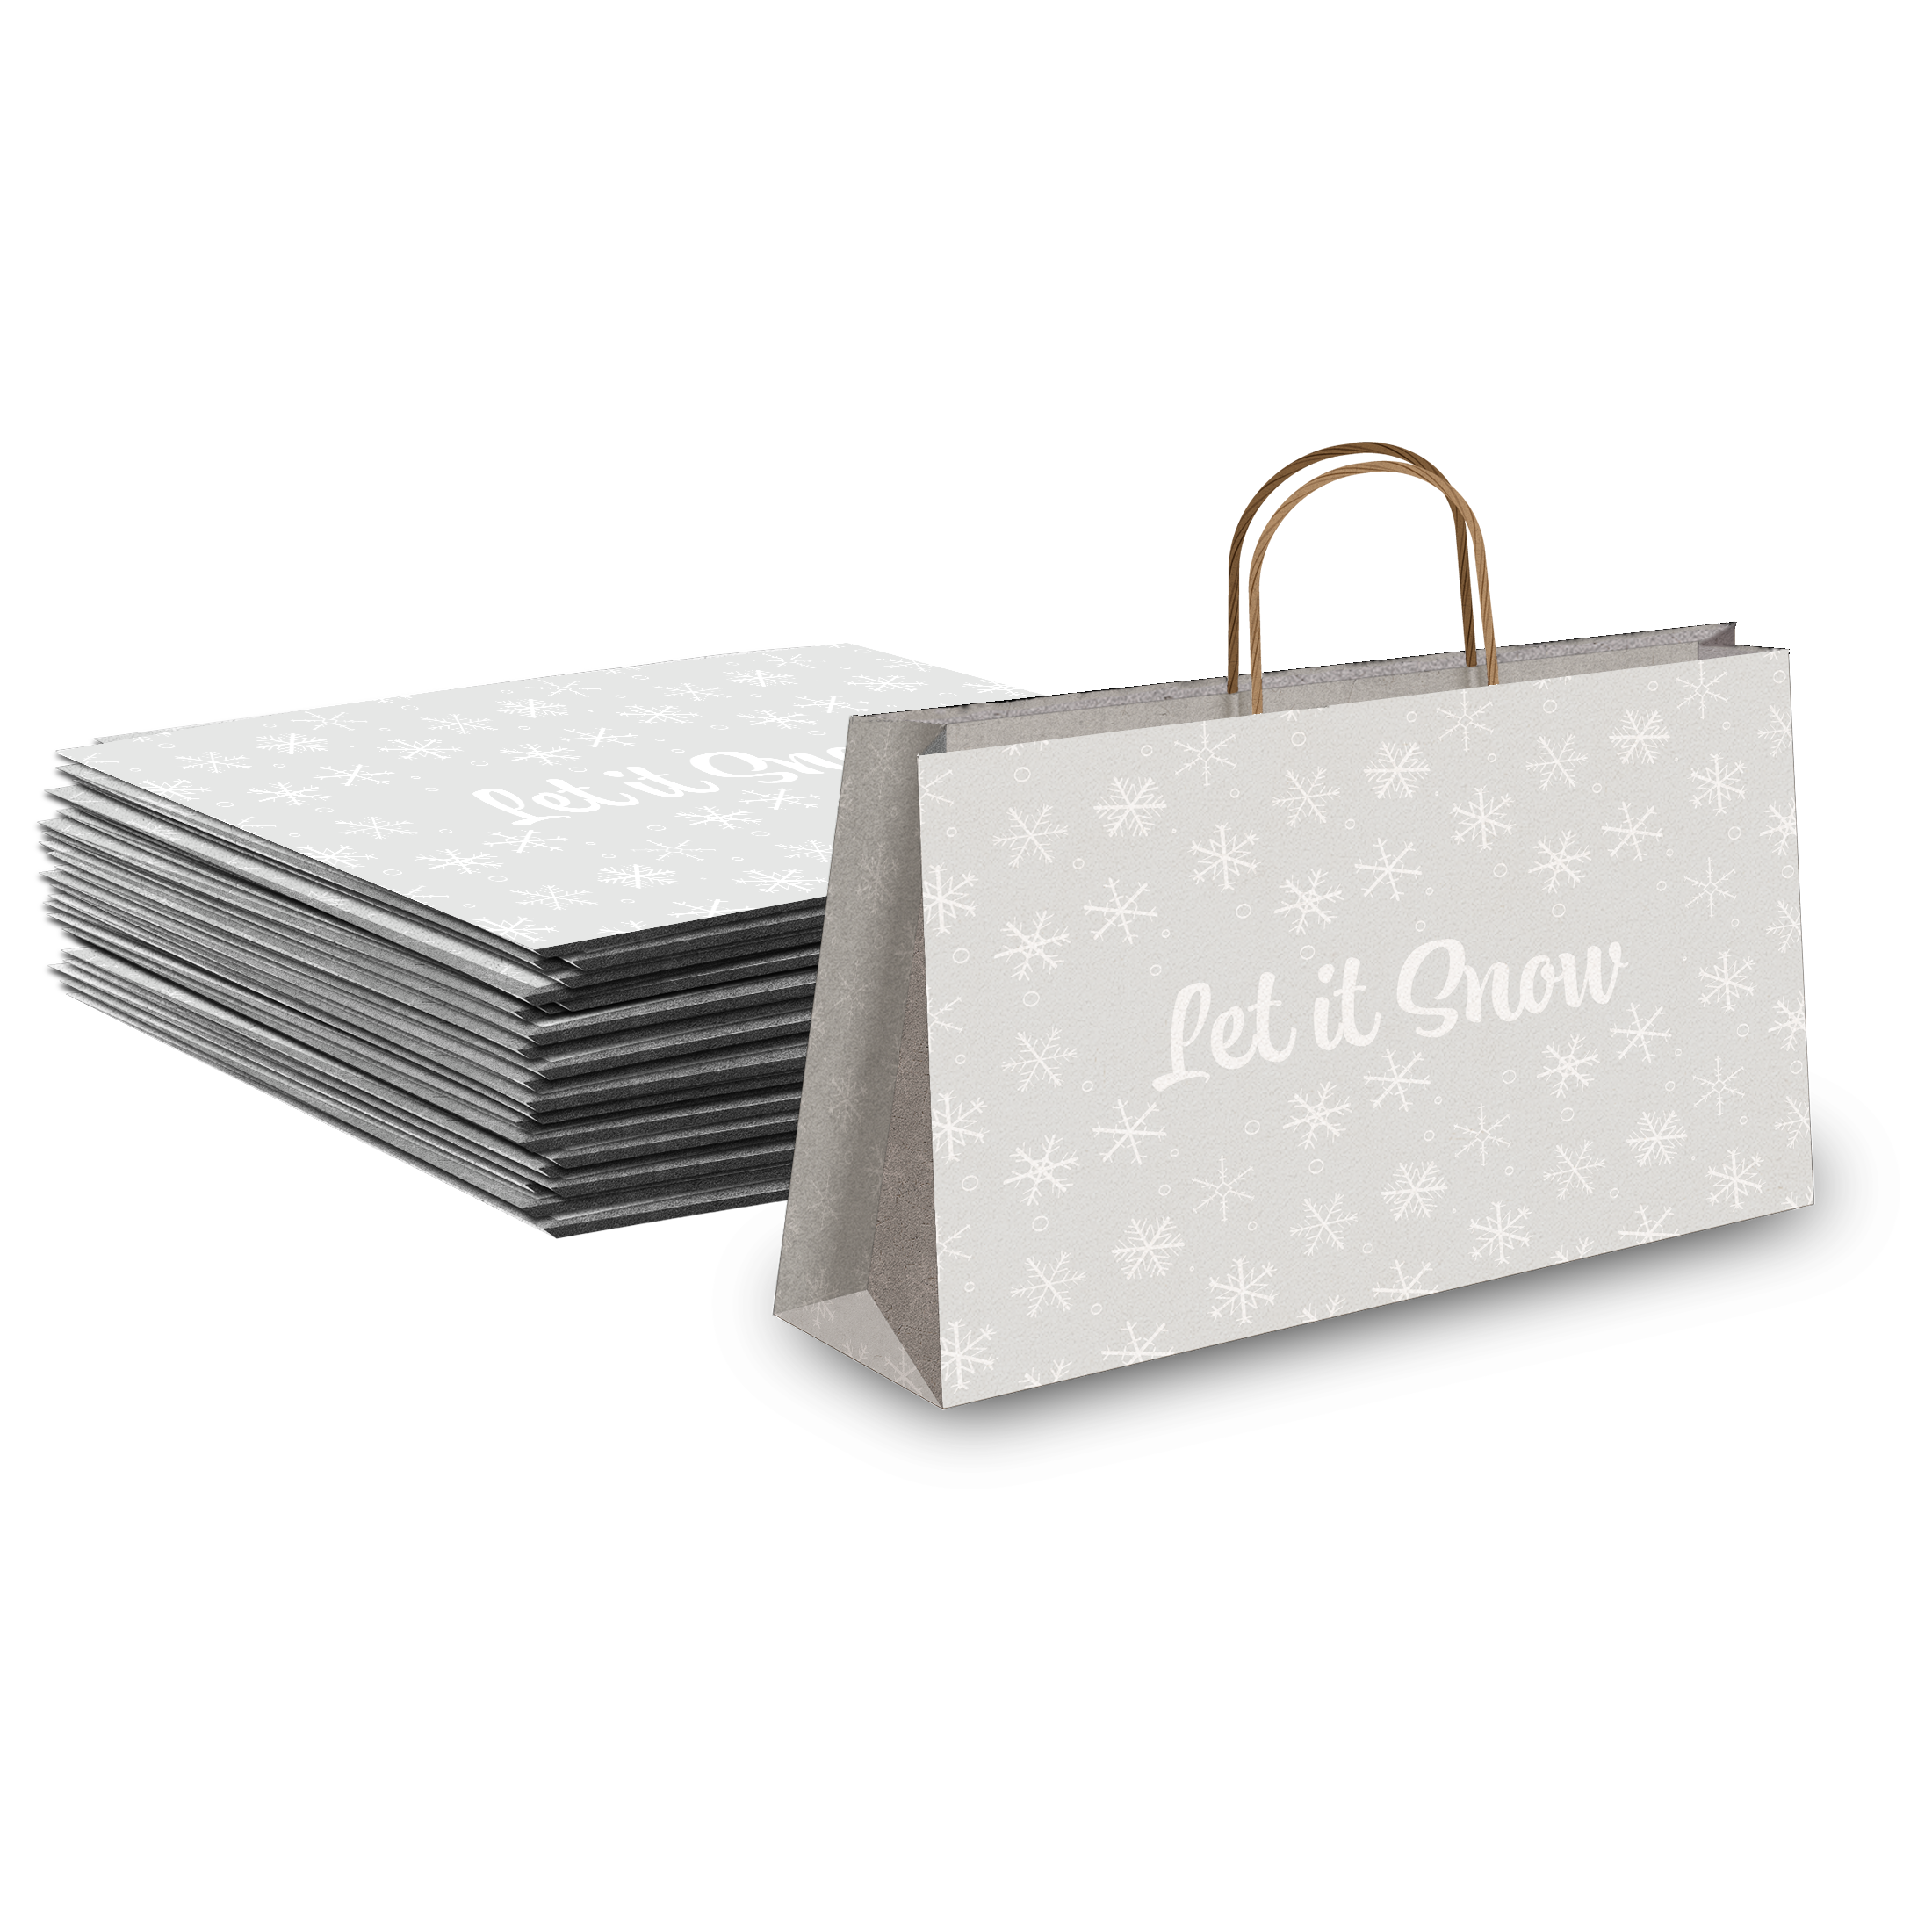 Let it Snow Large Birthday Gift Bags Vogue Kraft Shopping Bags with Handles (11.5x16x6 inches)